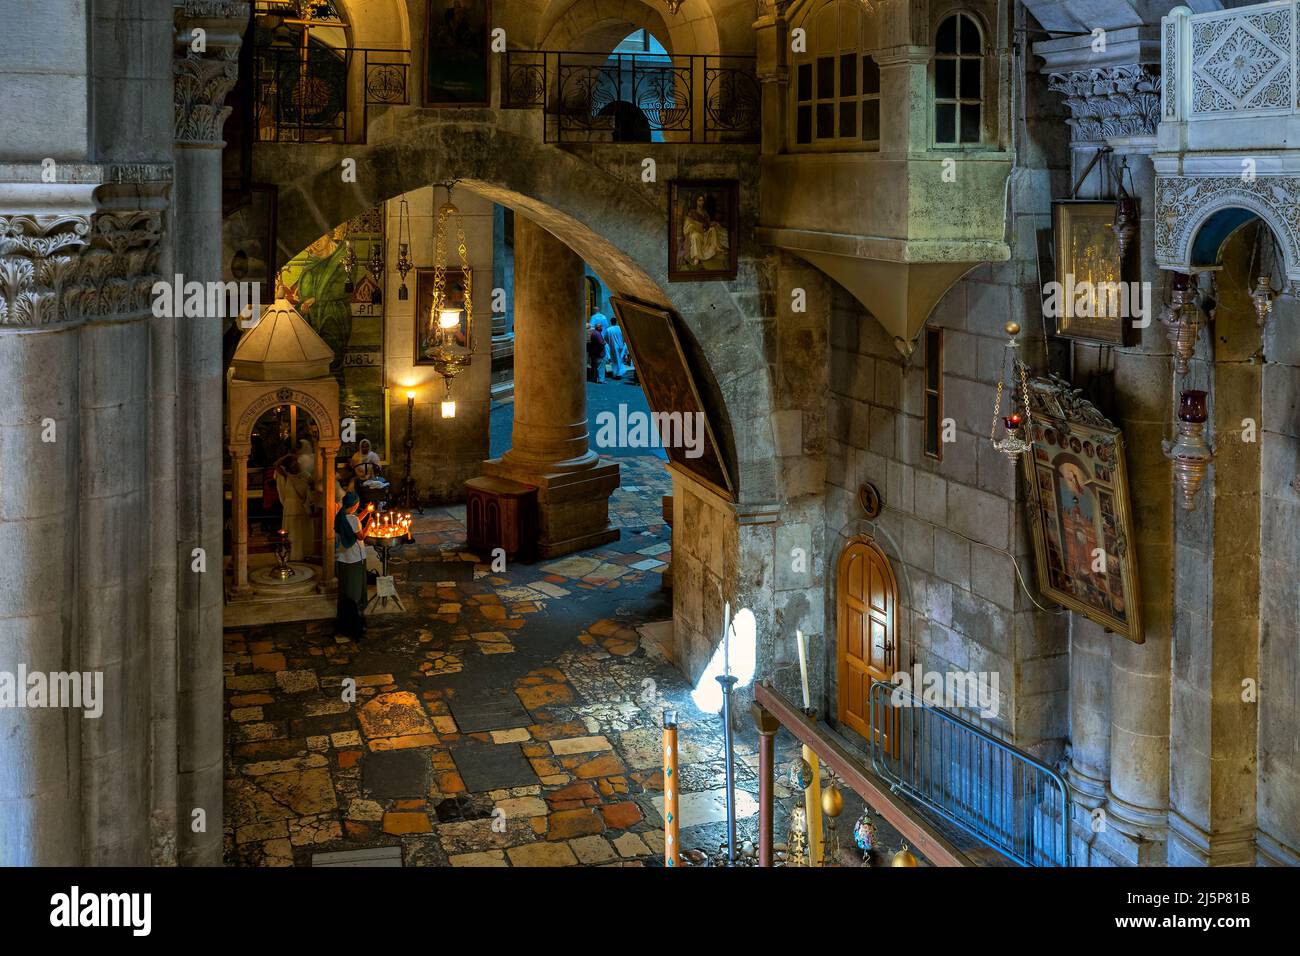 People inside of the Church of the Holy Sepulcher in Old City of Jerusalem, Israel. Stock Photo